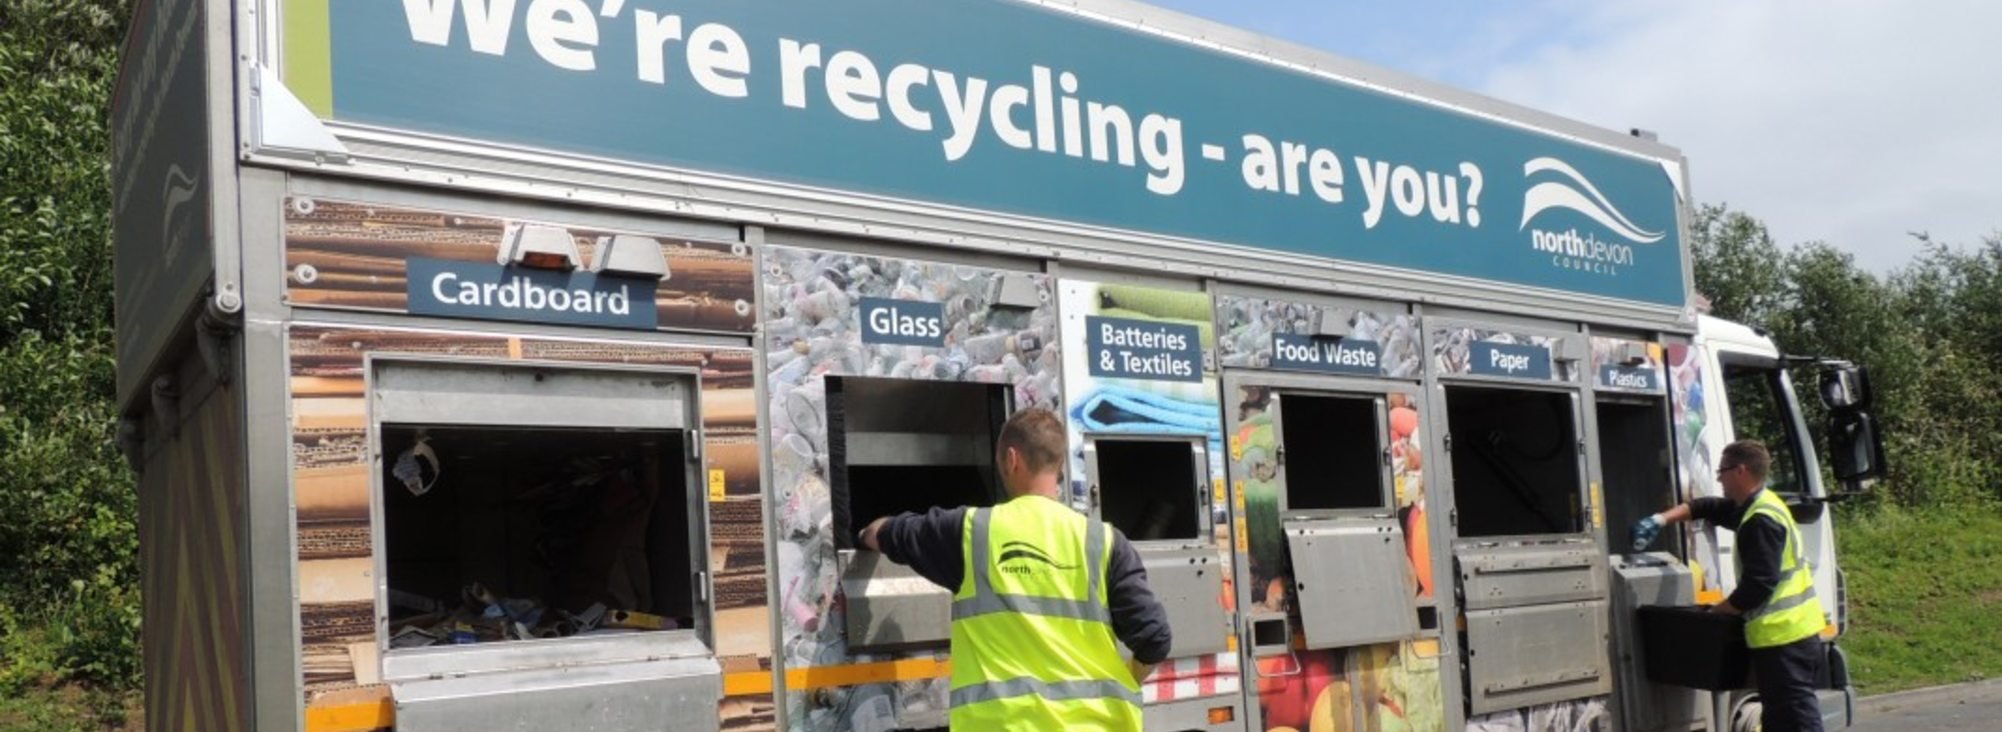 An image of a mobile recycling van